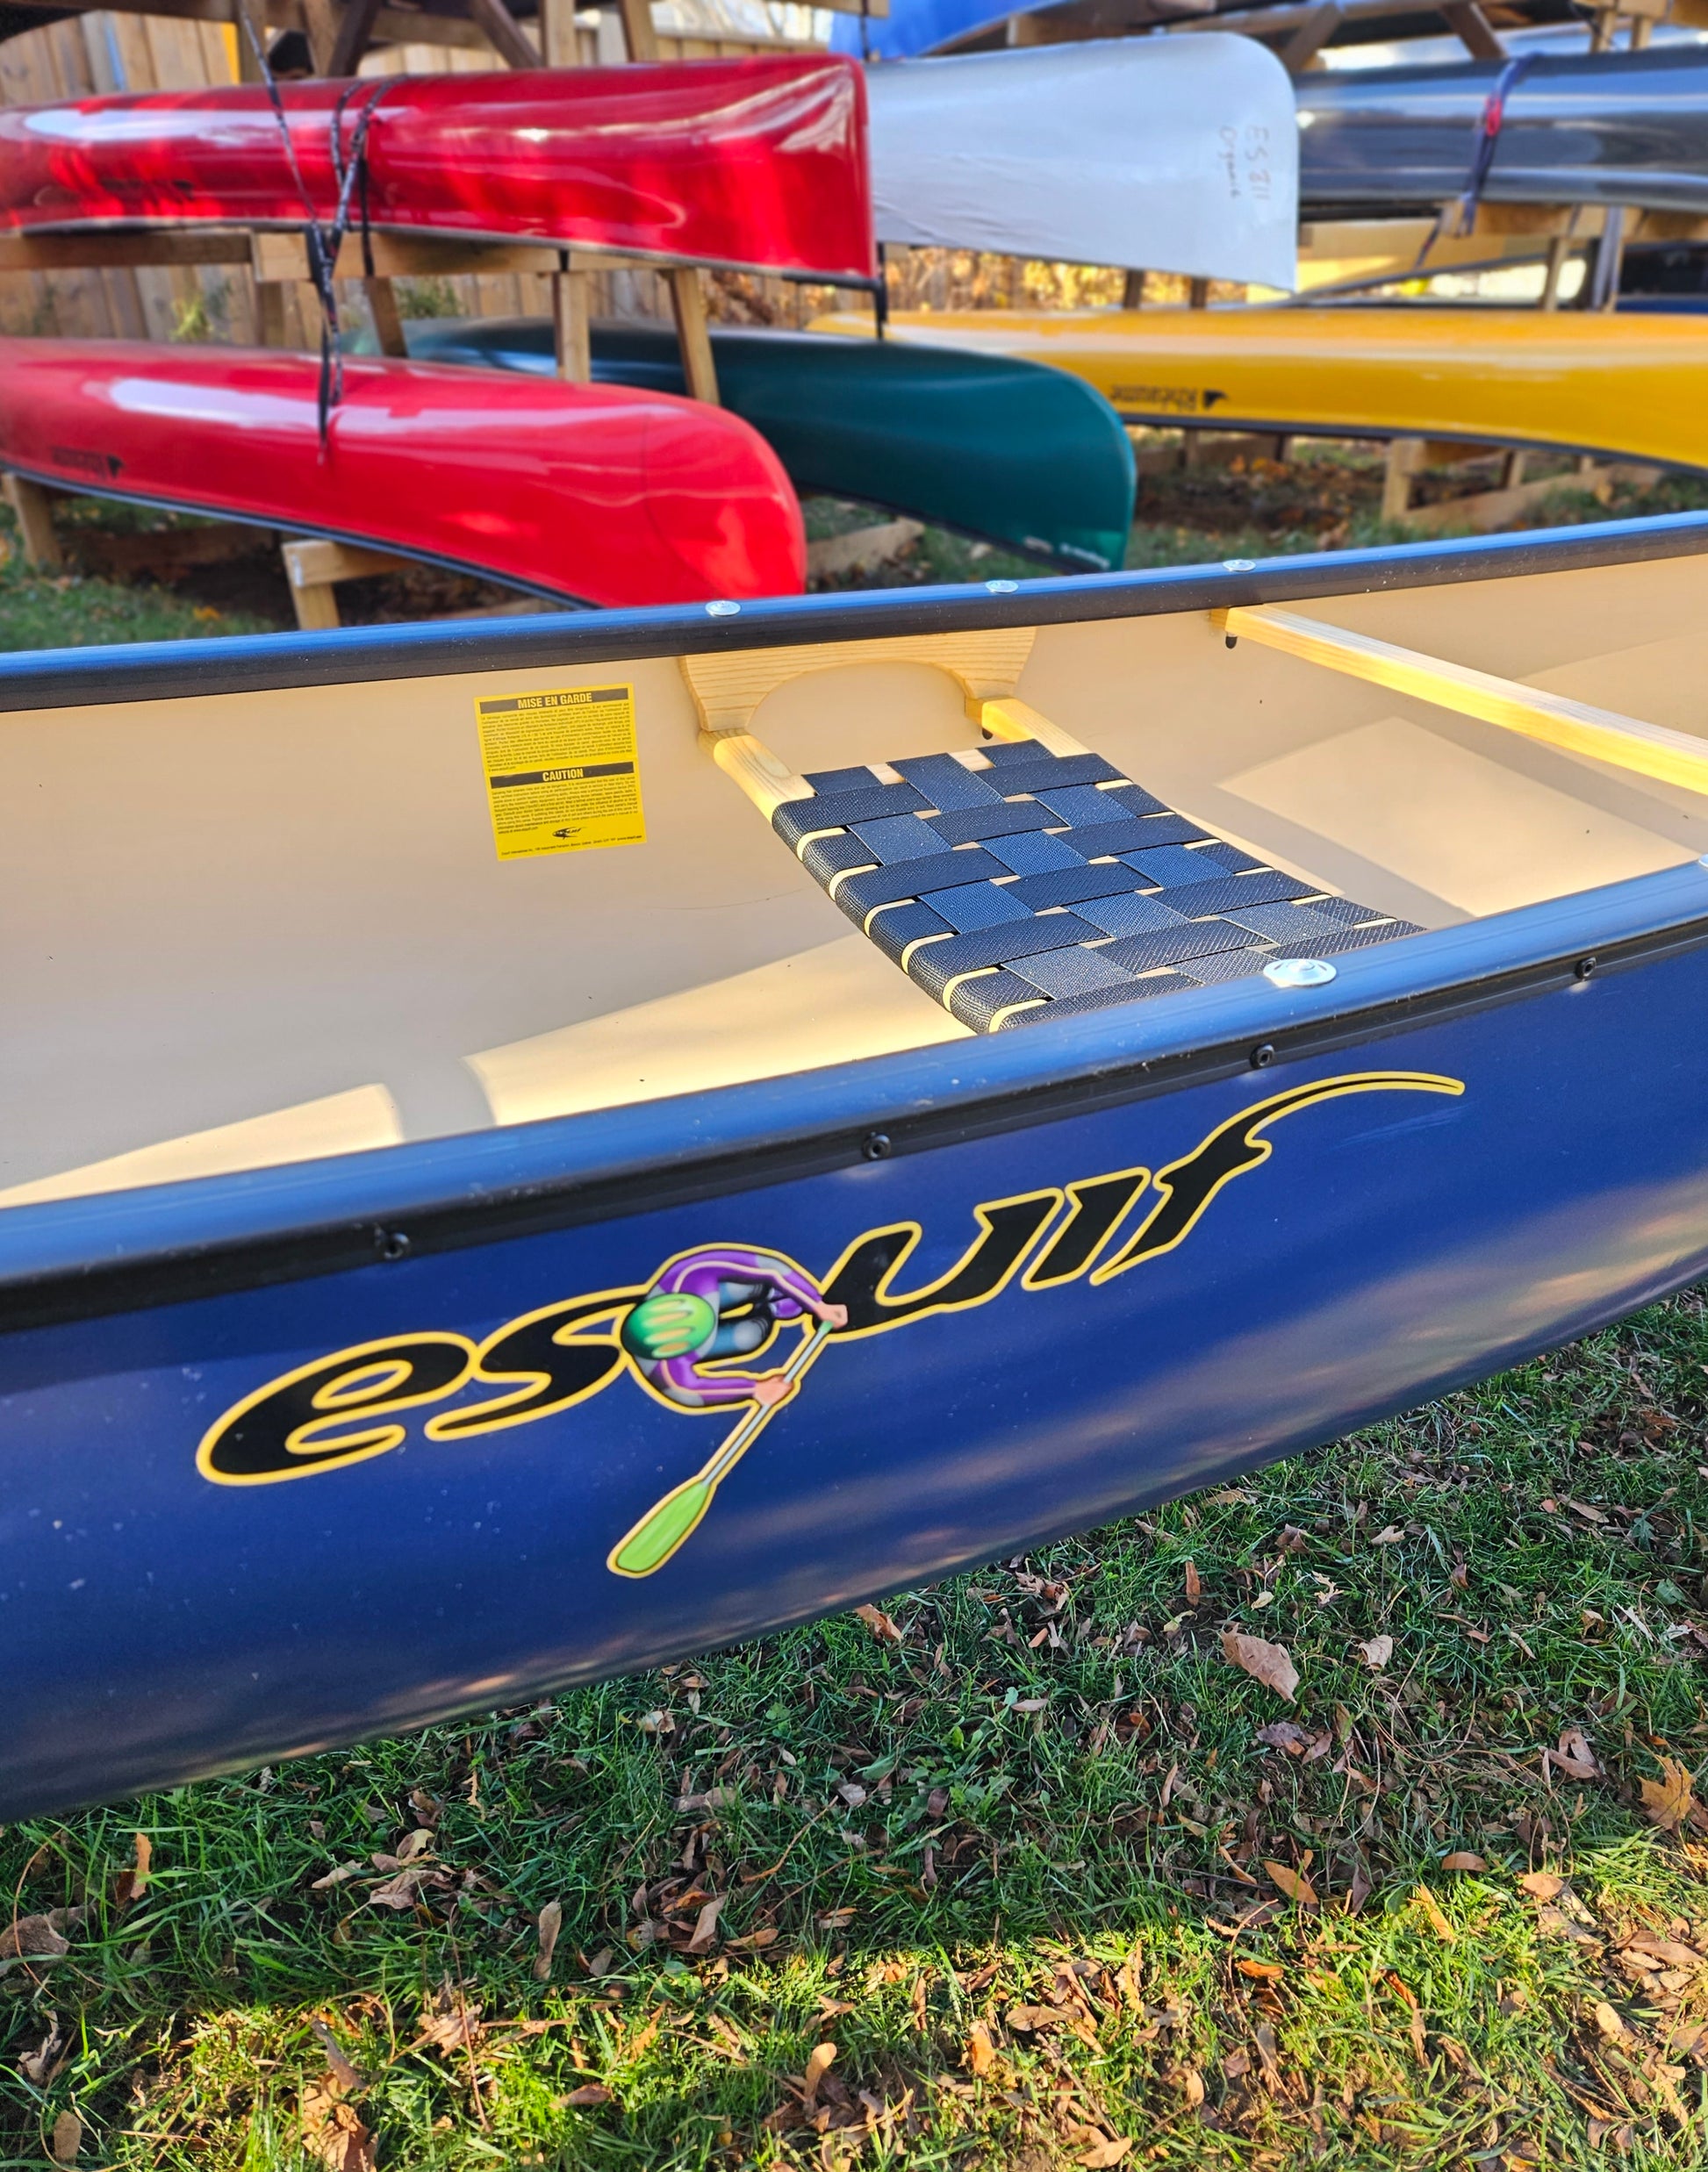 Esquif Adirondack 12' T-Formex Canoe:  With its ideal capacity, the Adirondack is your perfect partner for solo adventures, whether you're carrying fishing tackle and overnight gear or accompanied by a smaller friend, human or furry. It's the go-to choice for intimate paddling experiences.